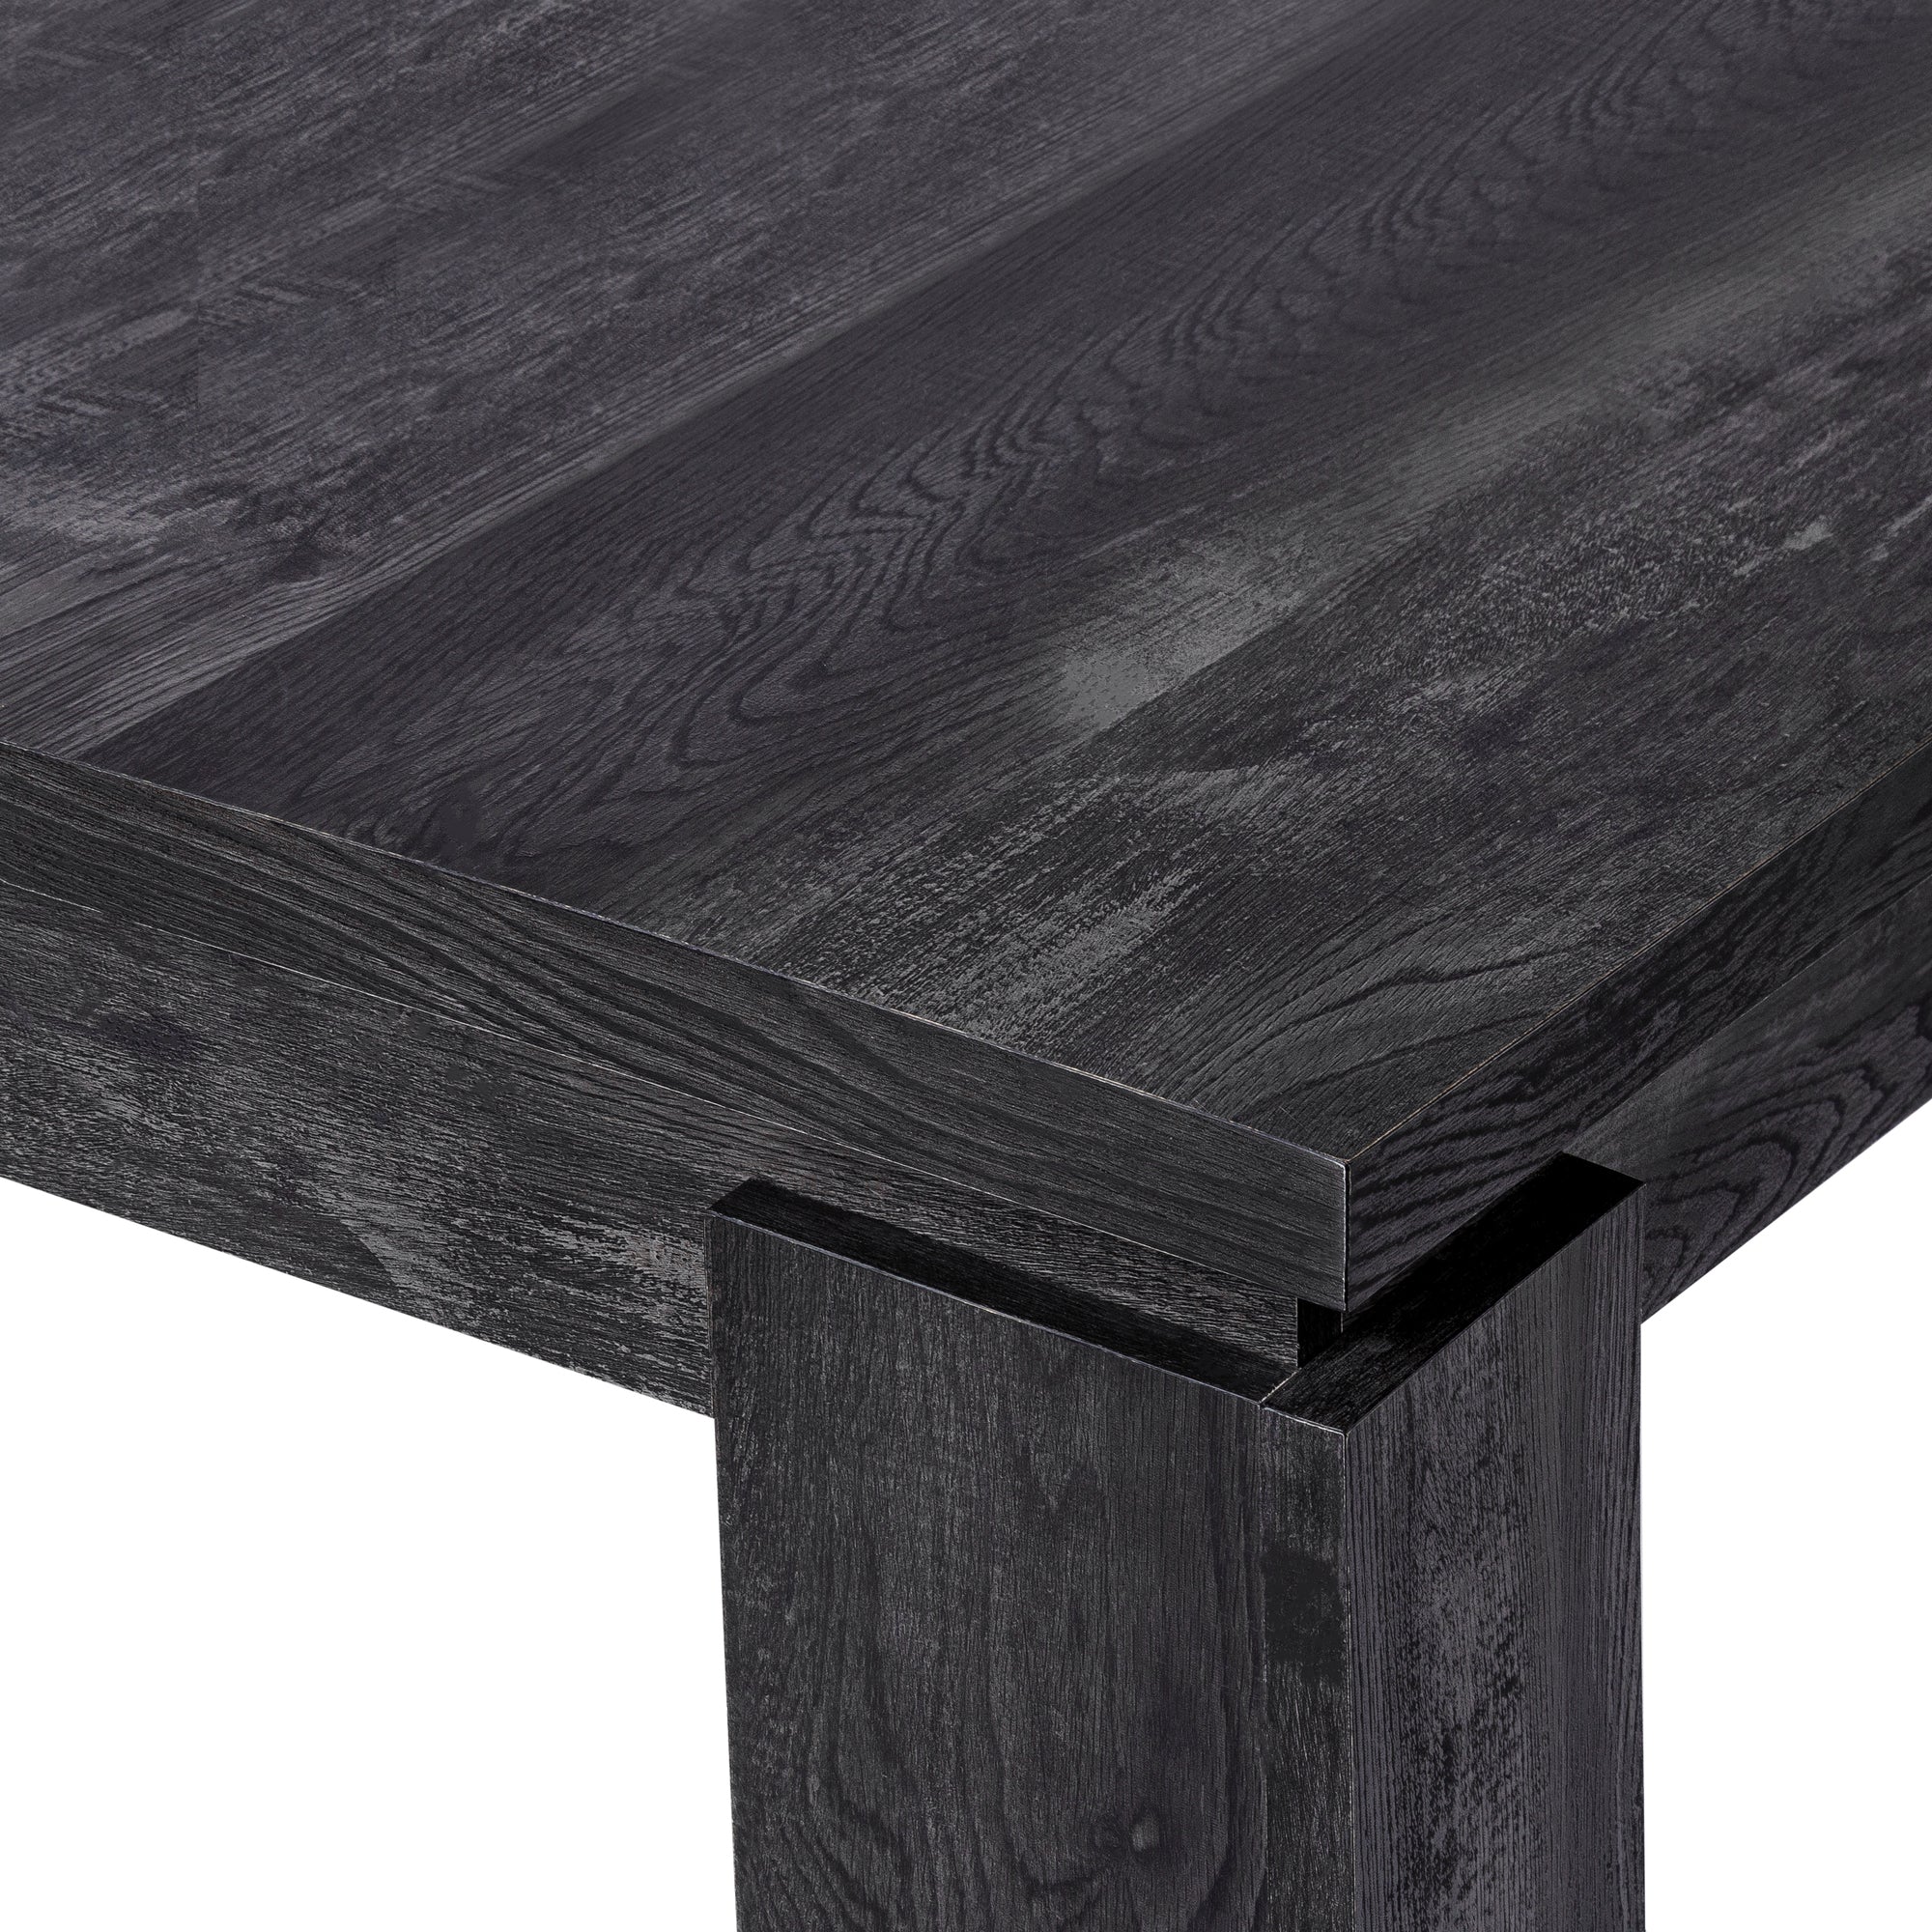 MN-451089    Dining Table, 60" Rectangular, Kitchen, Dining Room, Laminate, Black Reclaimed Wood Look, Contemporary, Modern